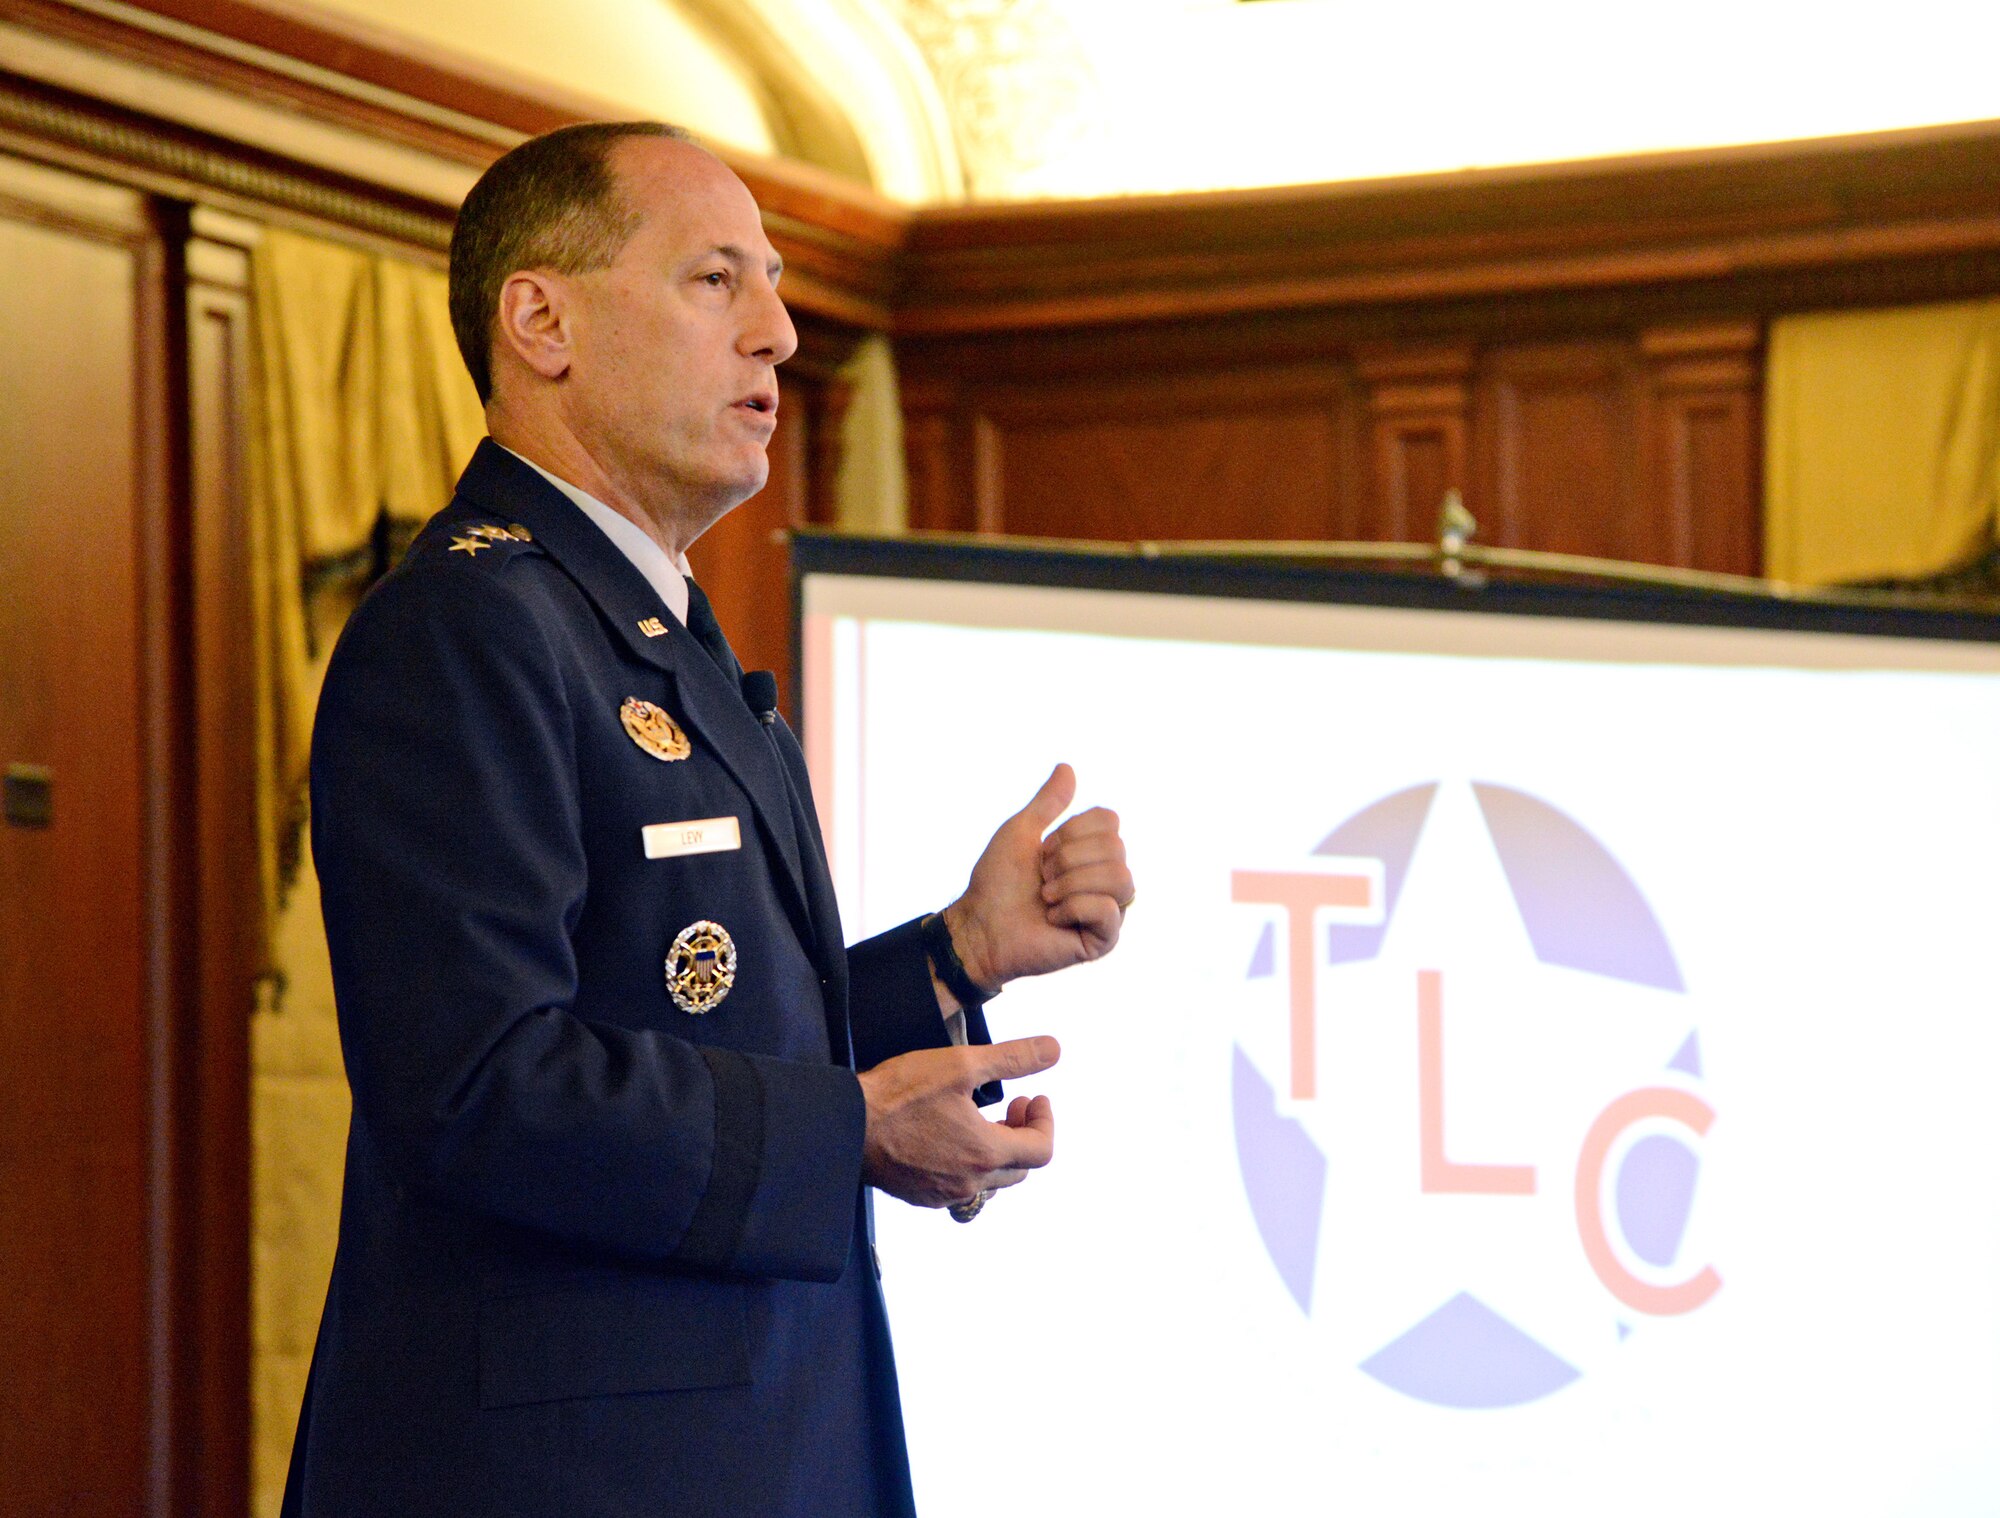 Air Force Sustainment Center Commander Lt. Gen. Lee Levy II spoke to military and community leaders and Oklahoma City Chamber members at the Tinker Leadership Community Luncheon July 22 at the Skirvin Hotel in Oklahoma City.